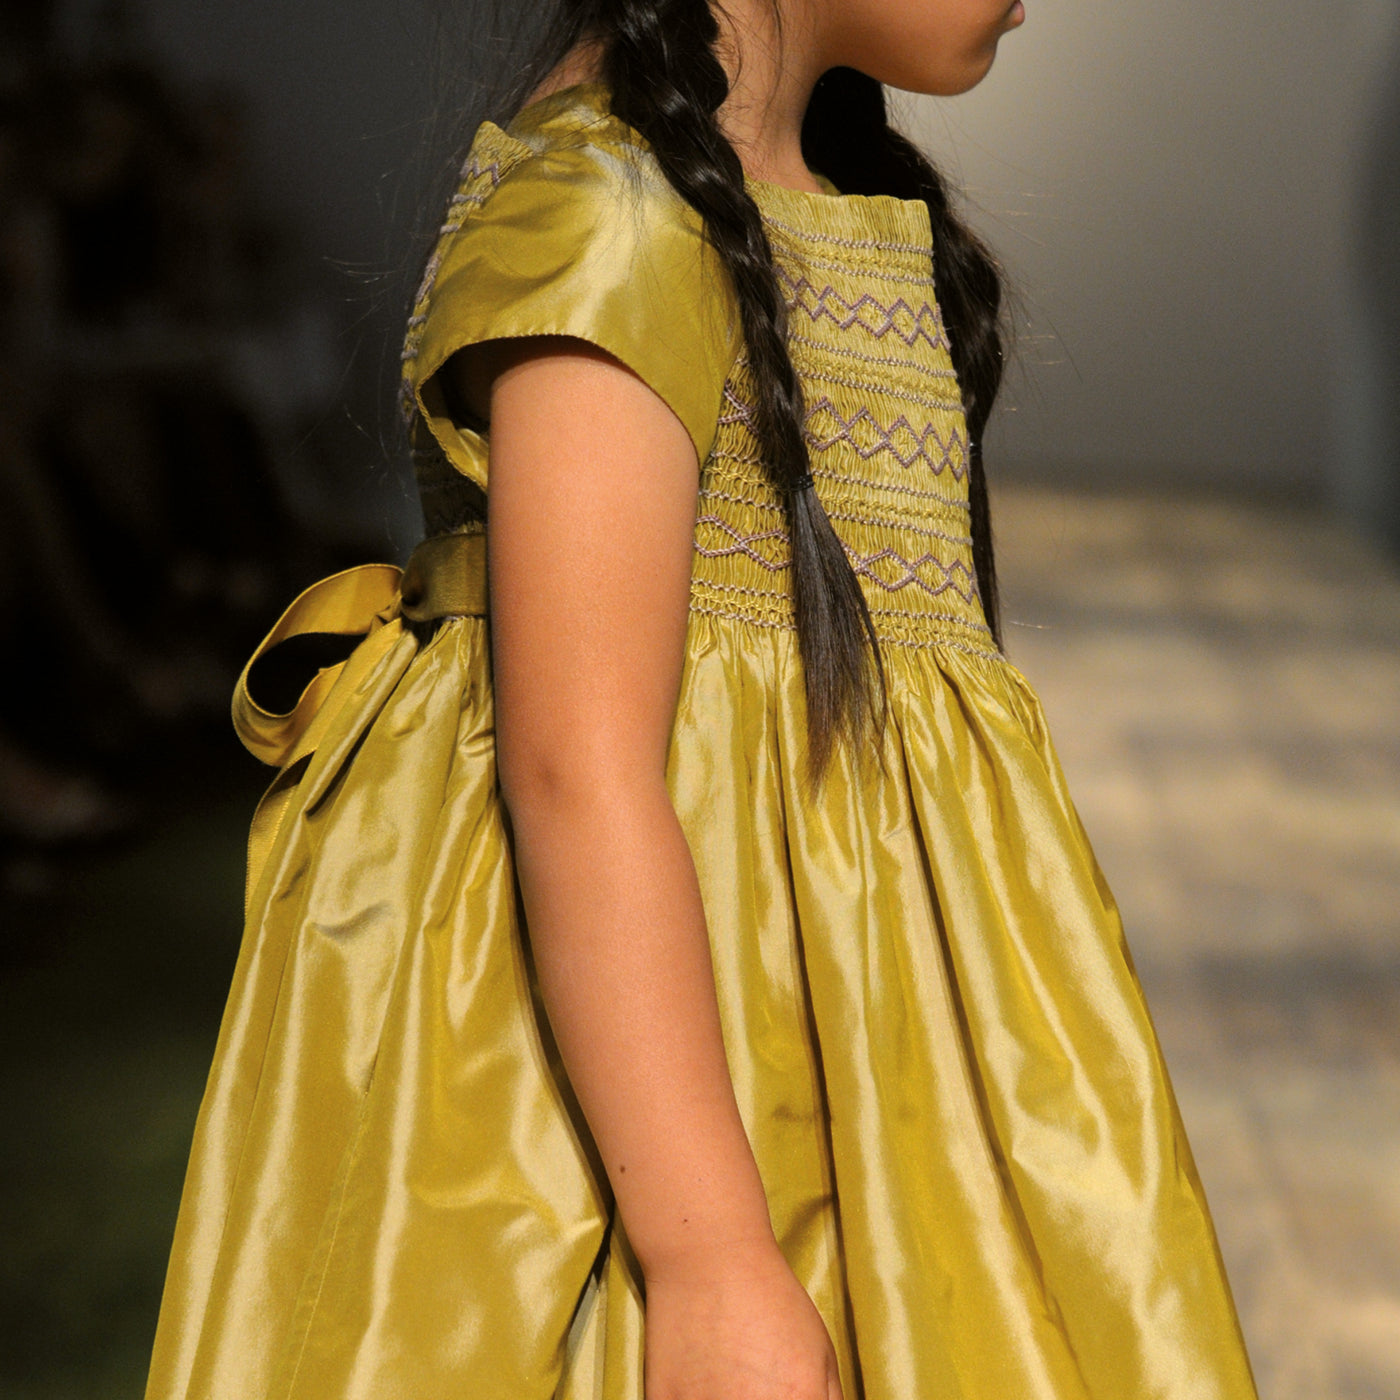 Bonpoint girl with braids in yellow formal dress